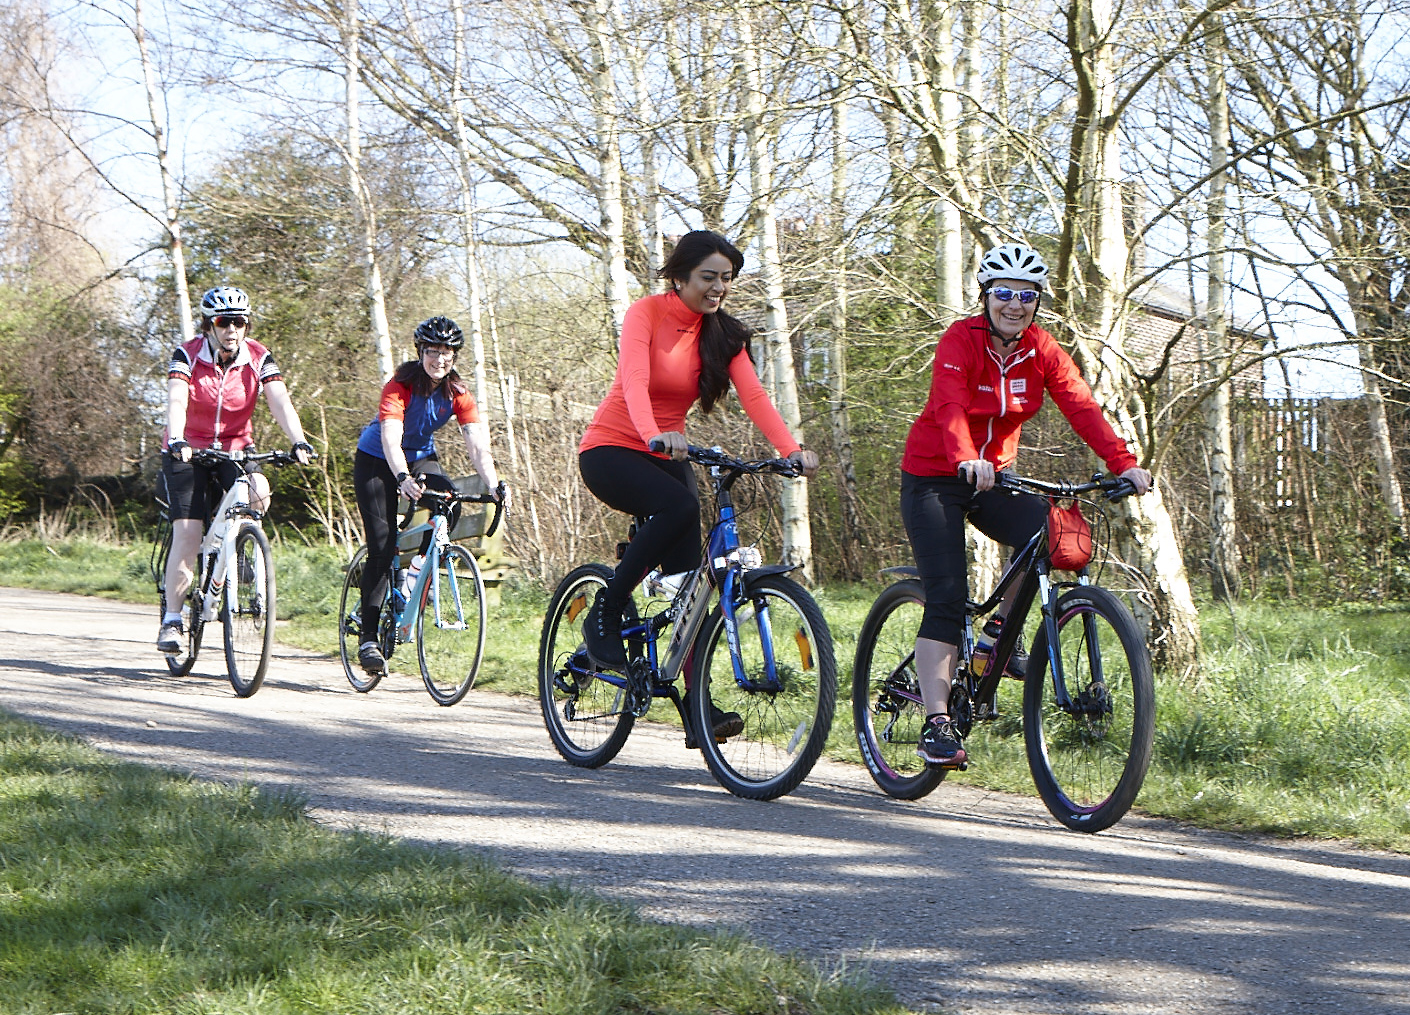 Photo shows four women cycling along a quiet off road path with trees in the background